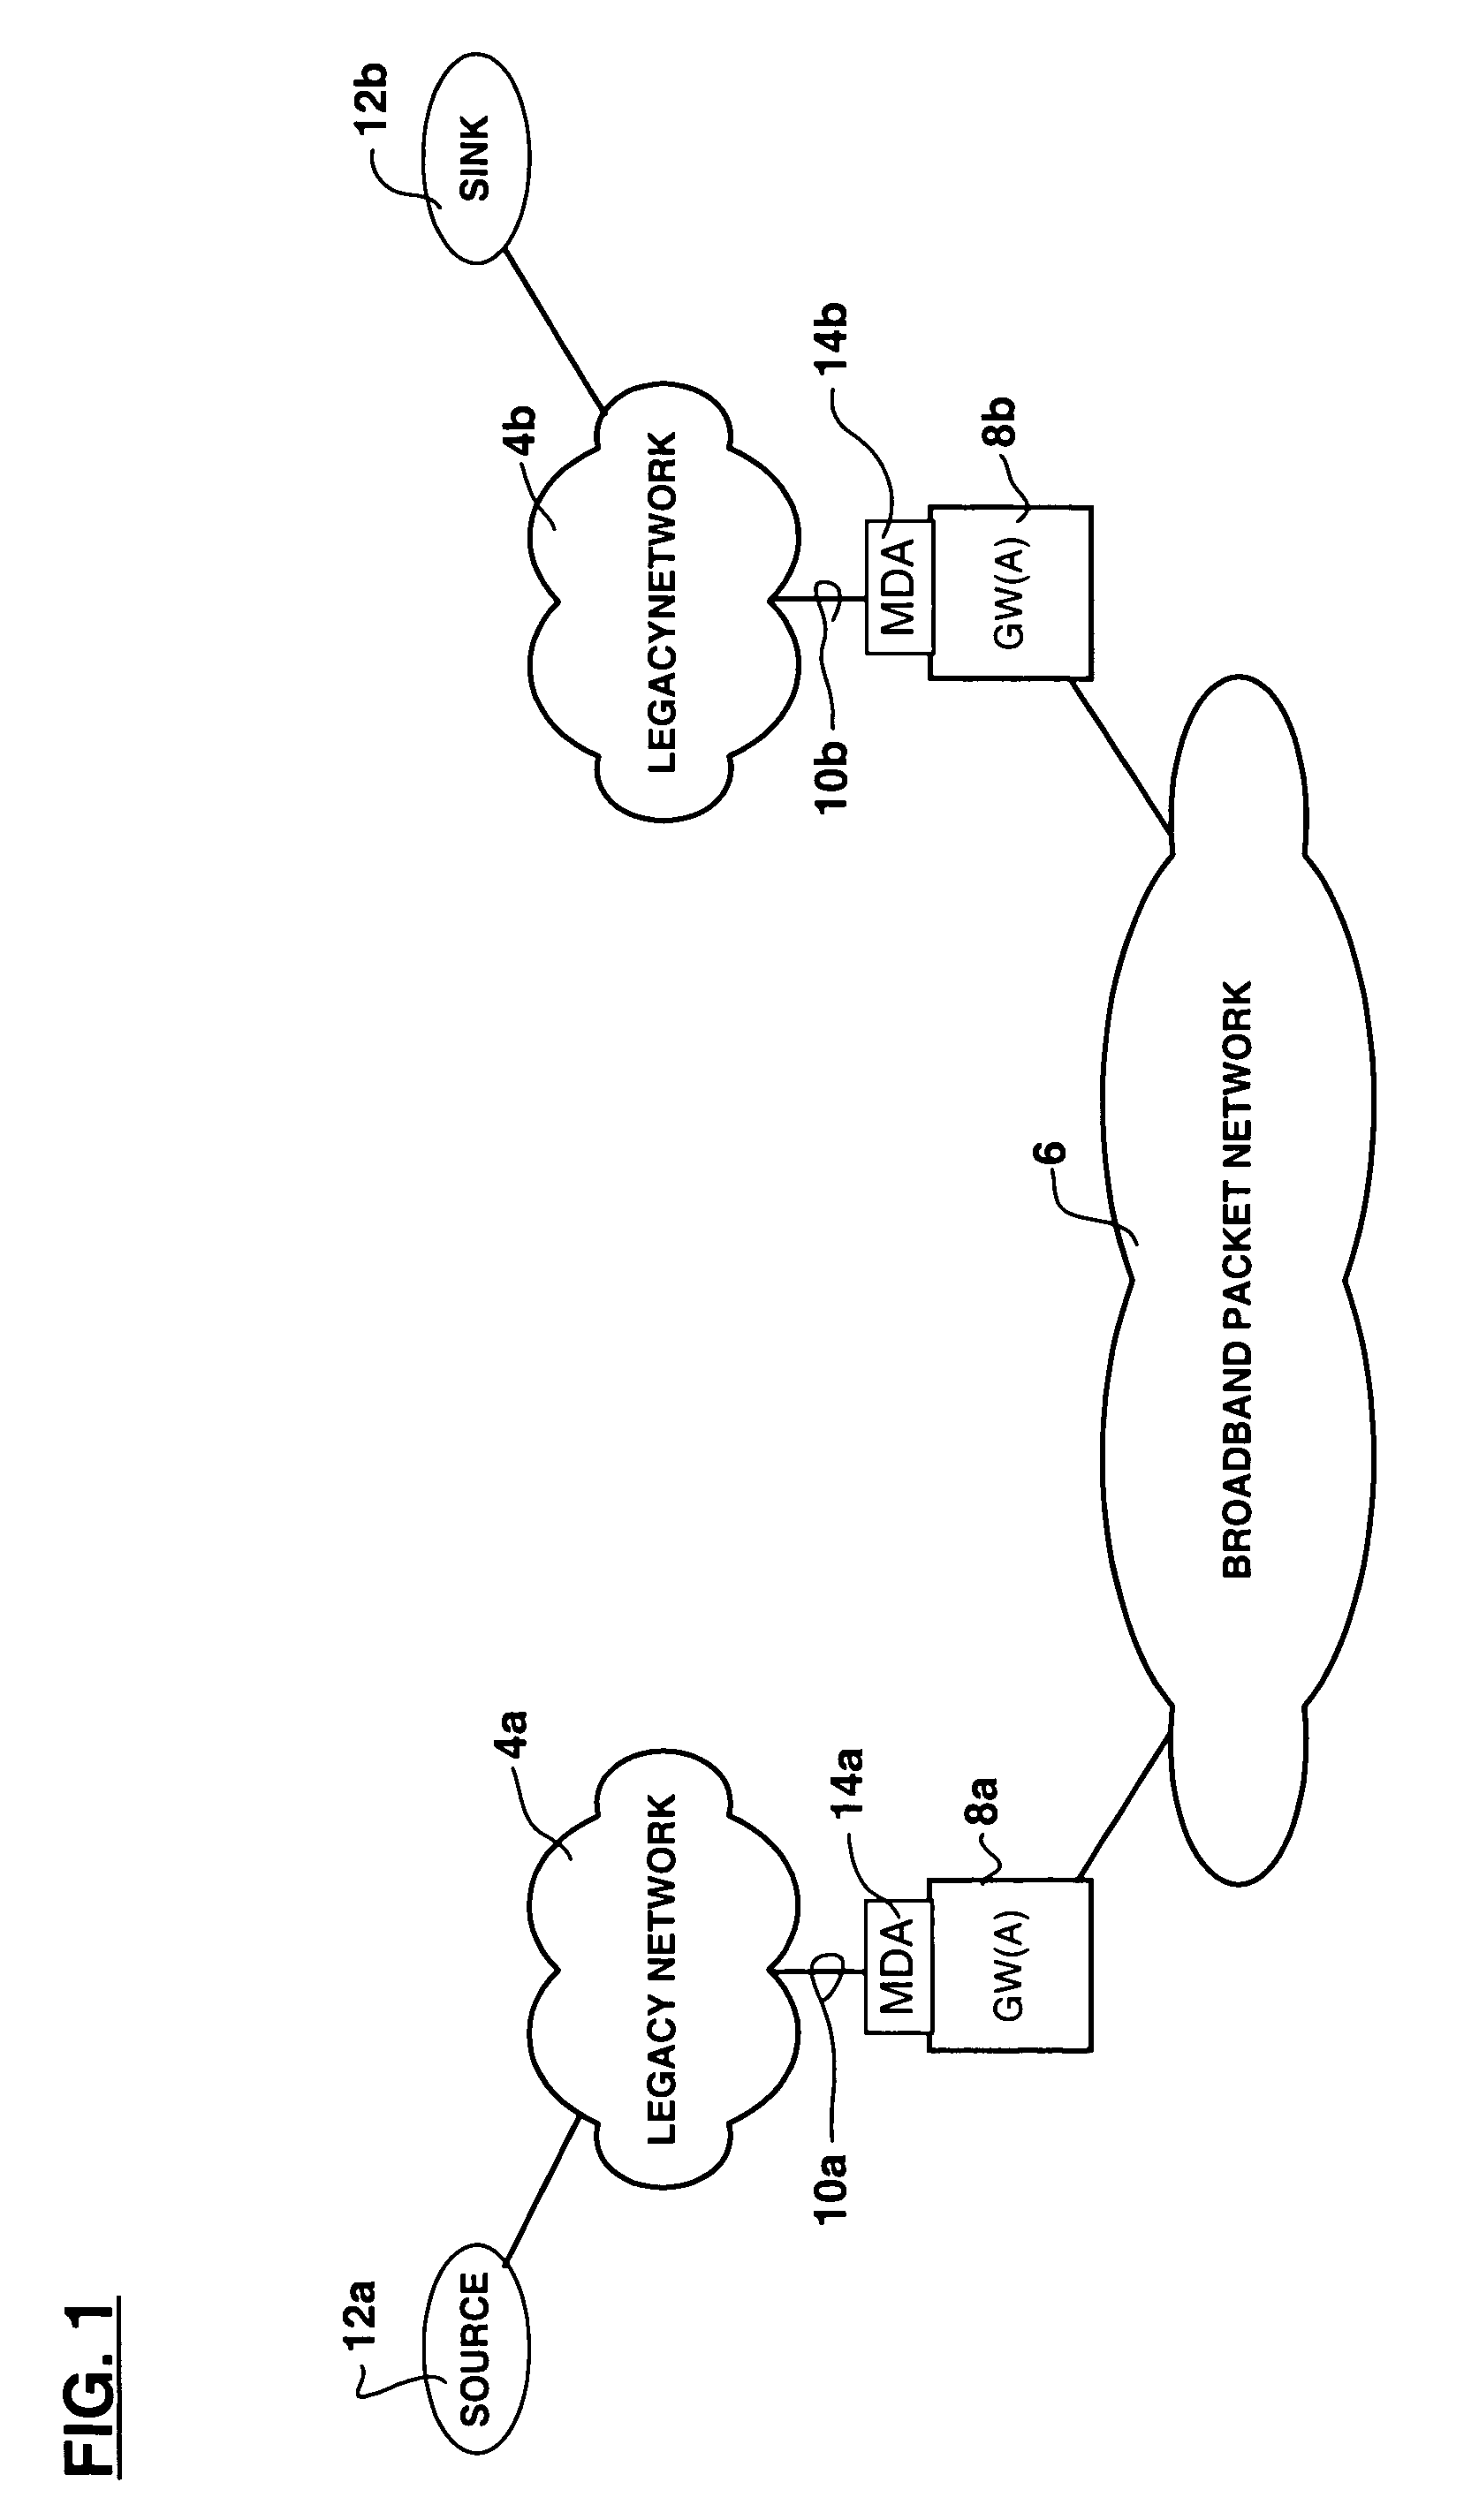 Method and apparatus for efficient protocol-independent trunking of data signals